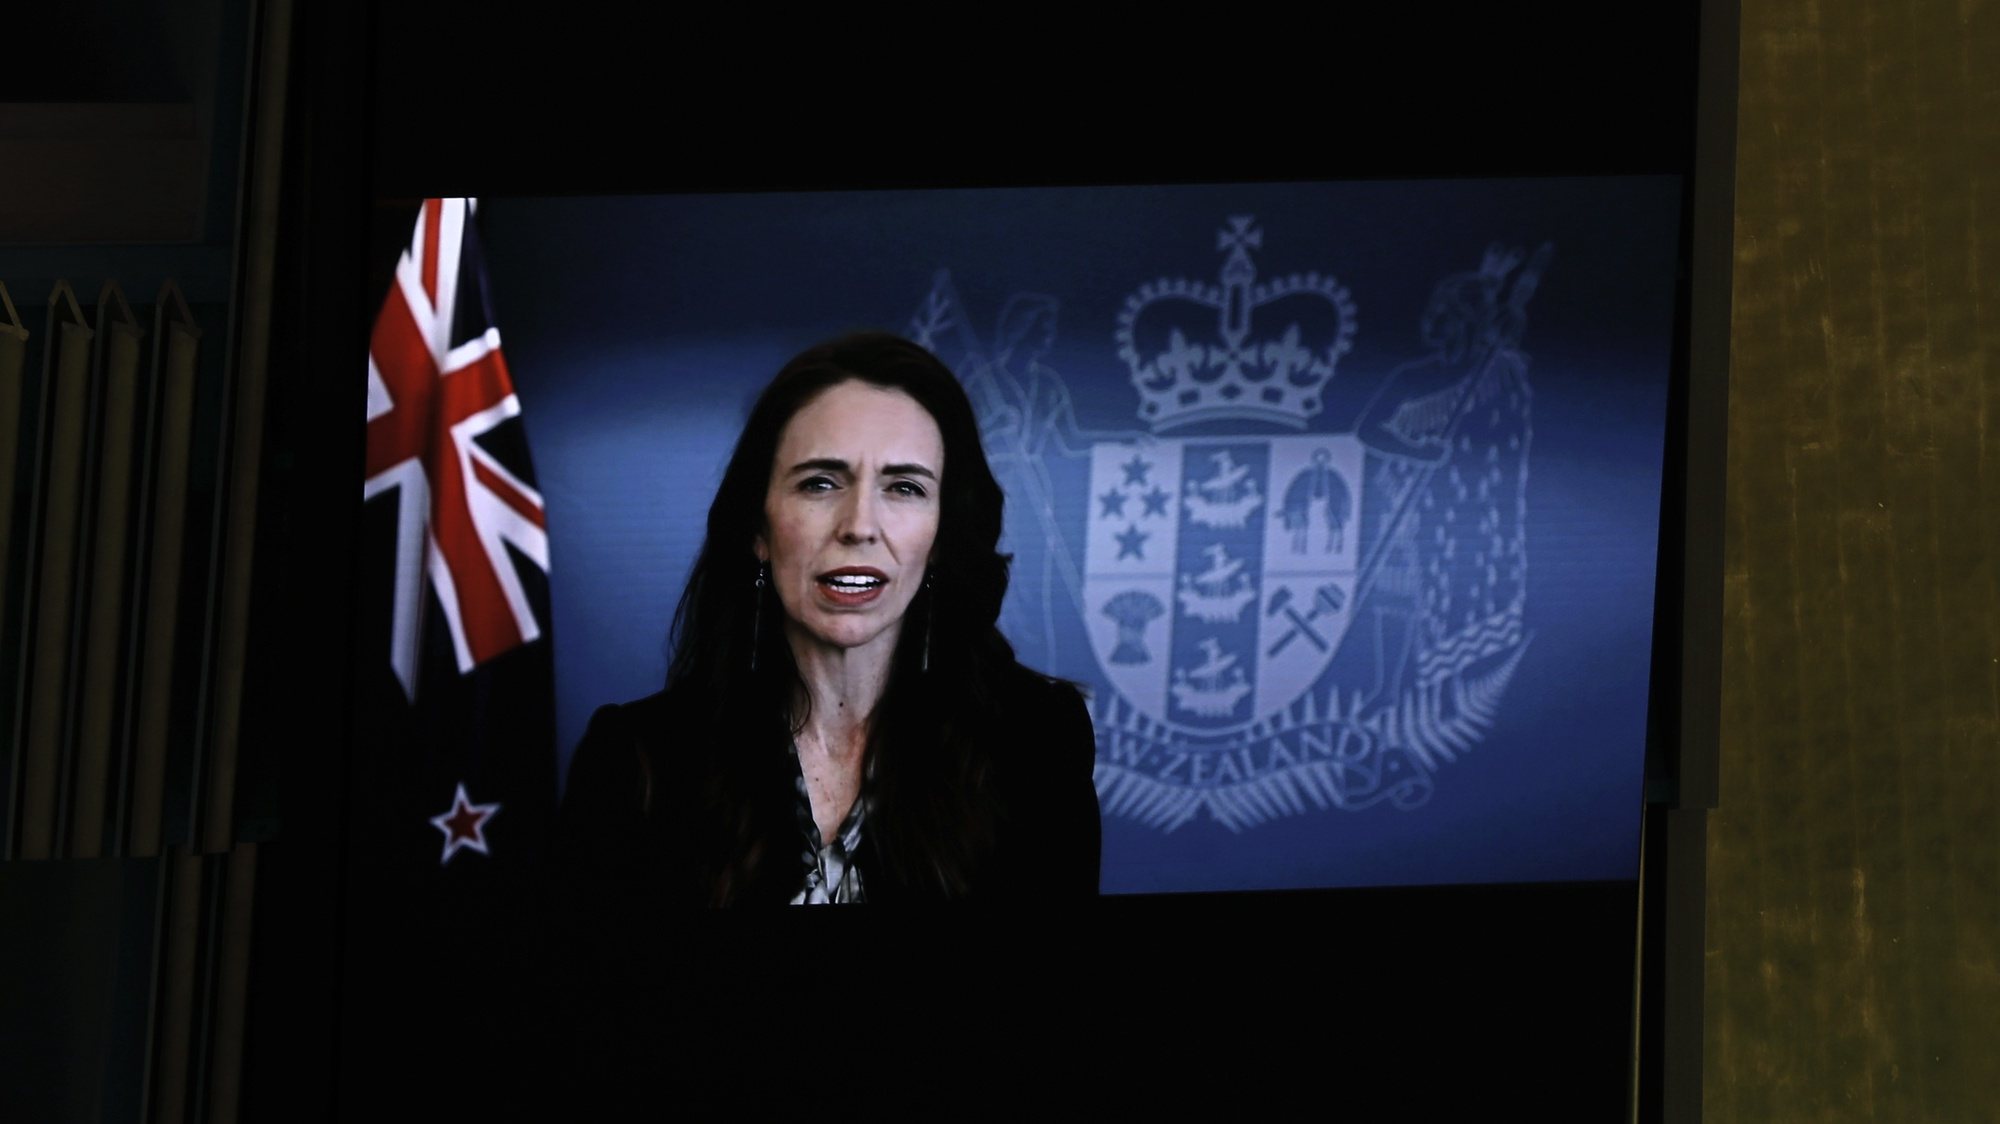 epa09486458 Prime Minister of New Zealand, Jacinda Ardern addresses, via prerecorded video, the General Debate of the 76th Session of the United Nations General Assembly at UN Headquarters in New York, New York, USA, 24 September 2021.  EPA/PETER FOLEY